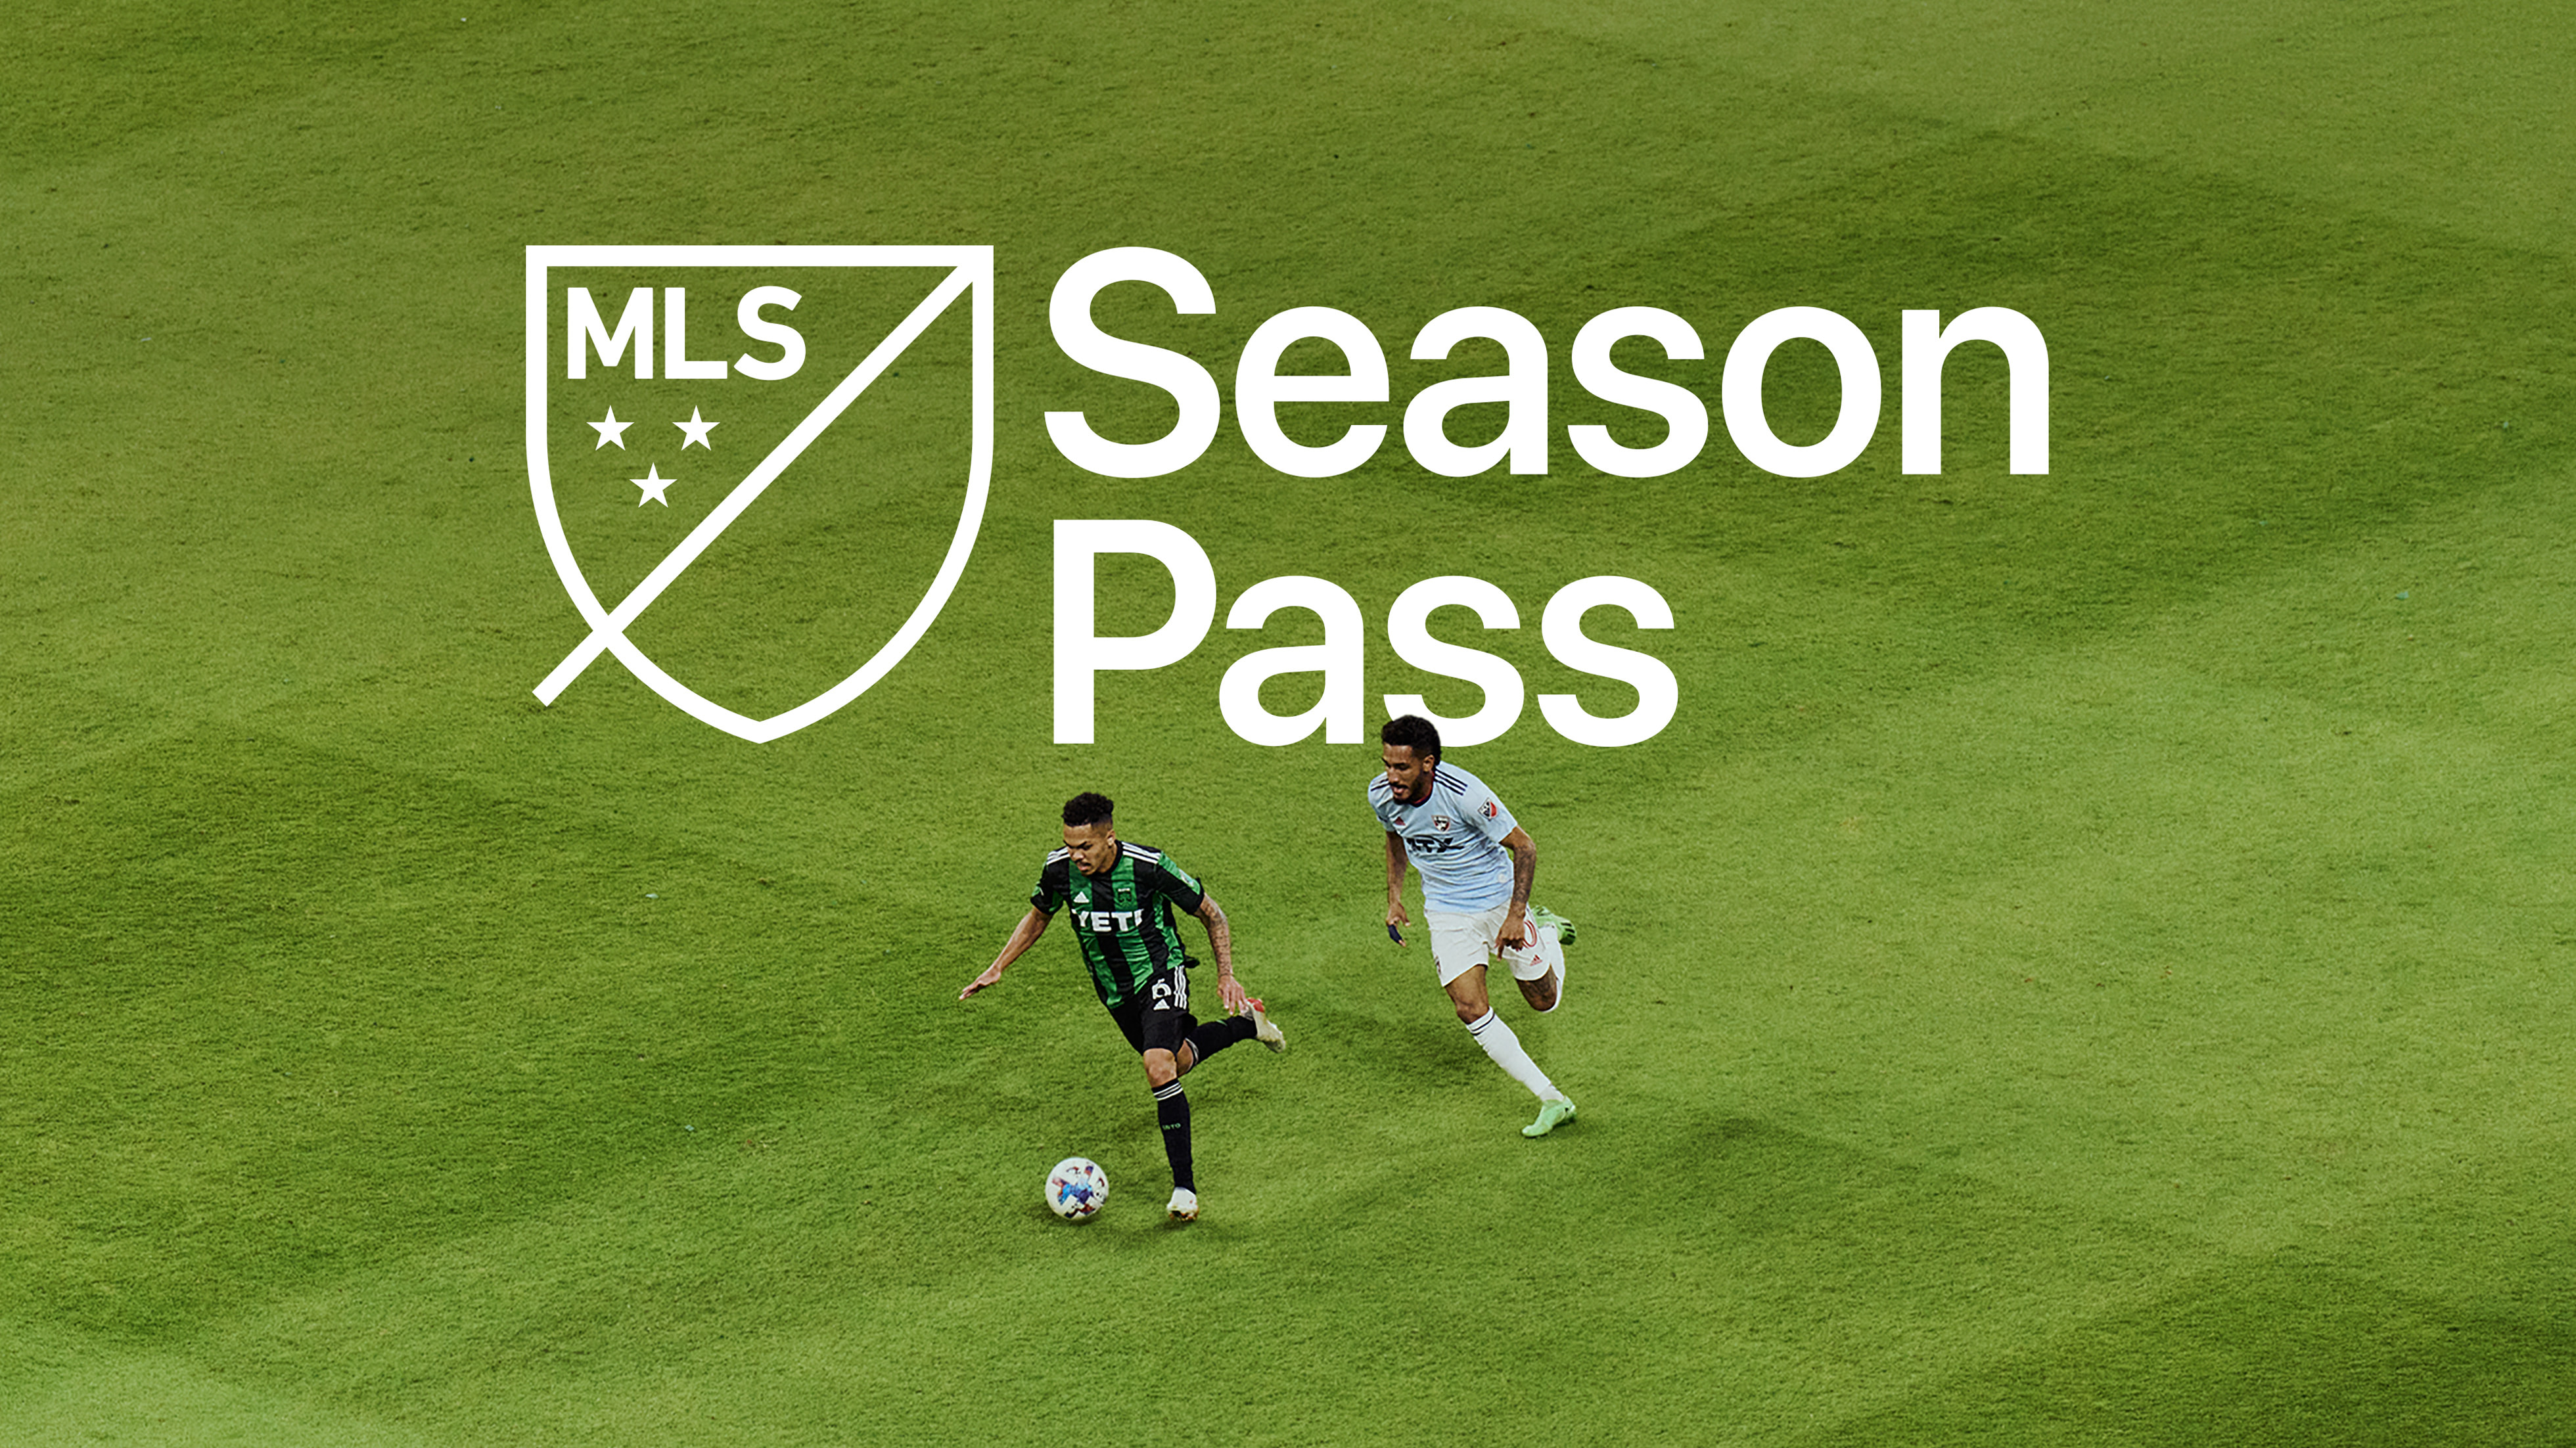 Apple and Major League Soccer unveil broadcasters for MLS Season Pass